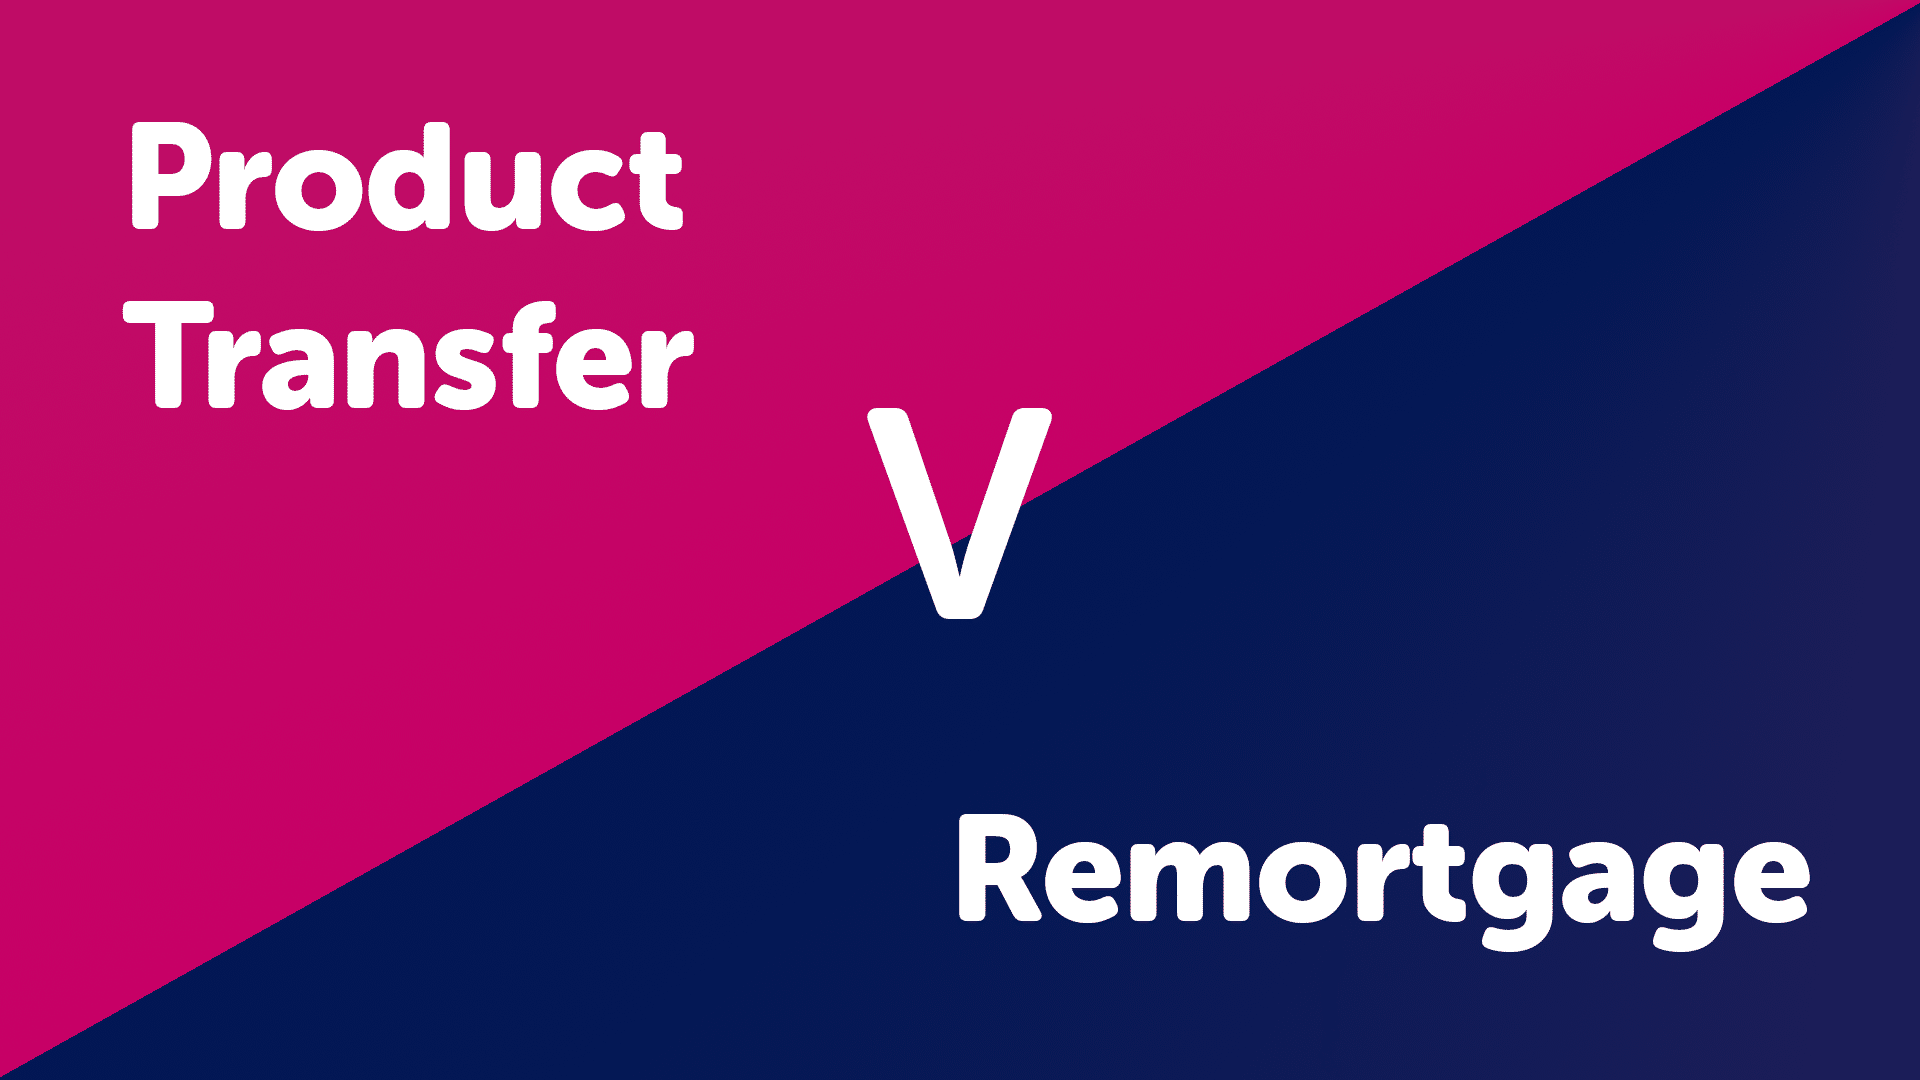 Product Transfer V Remortgage in Derby